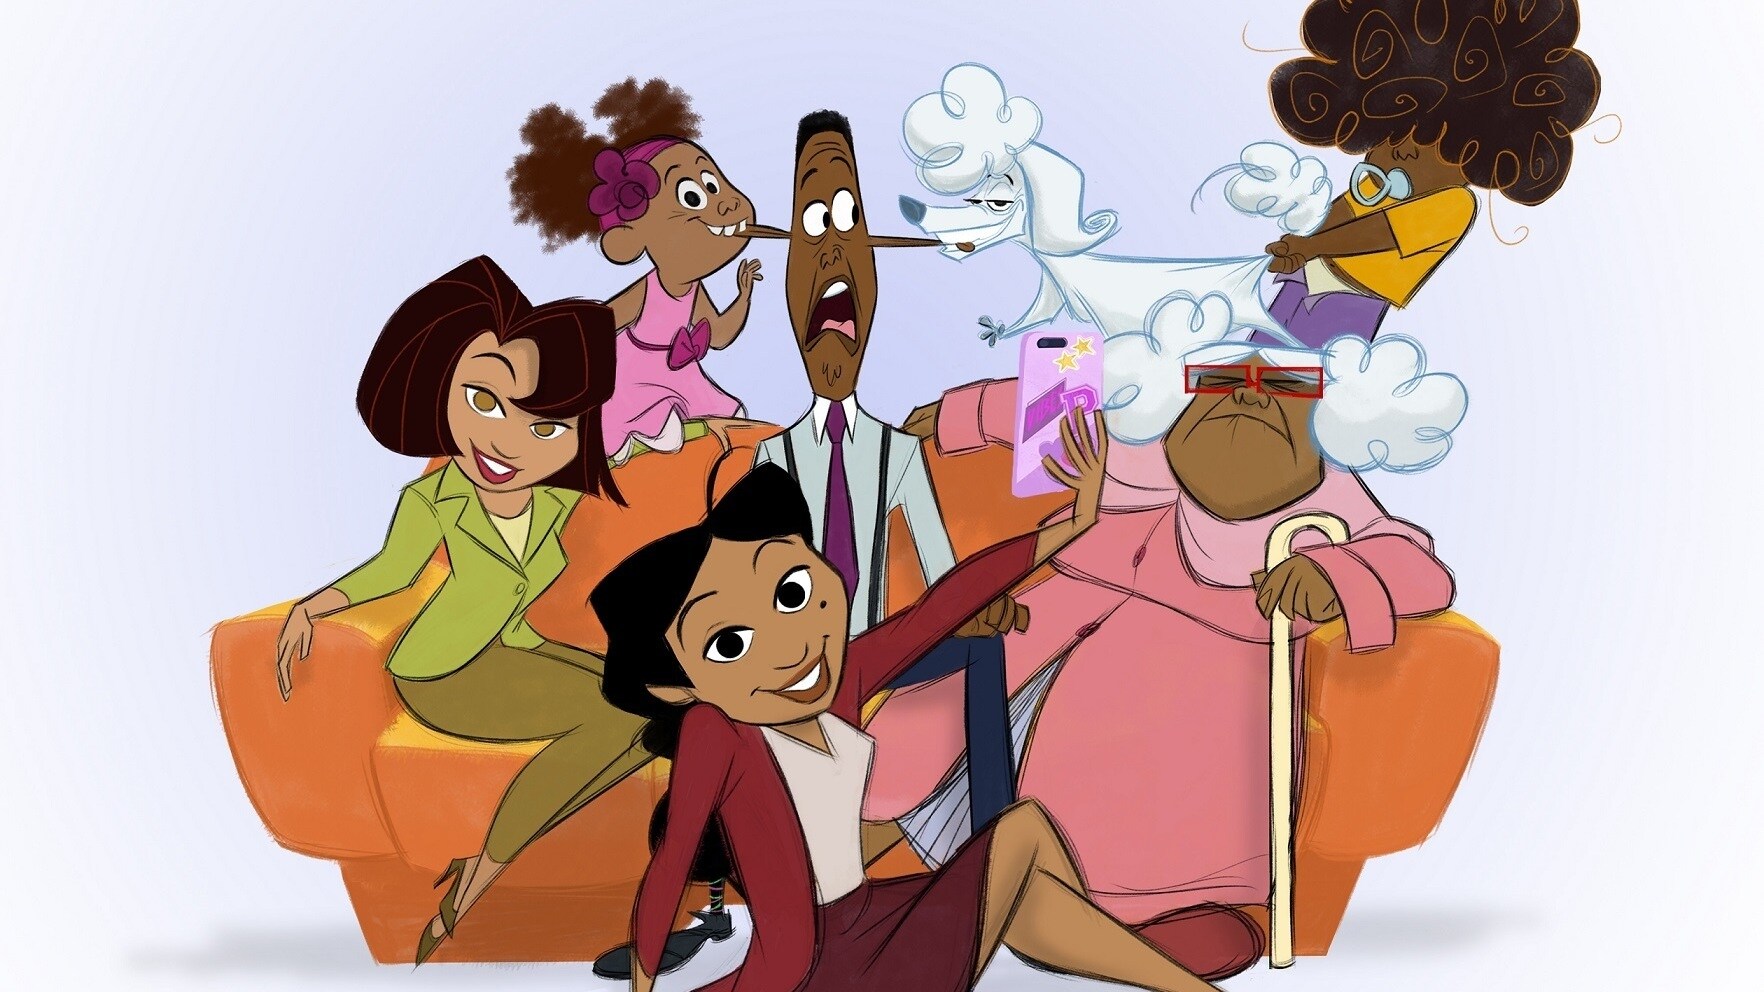 Disney+ Orders "The Proud Family: Louder and Prouder," the Long-Awaited Revival of the Groundbreaking Animated Series